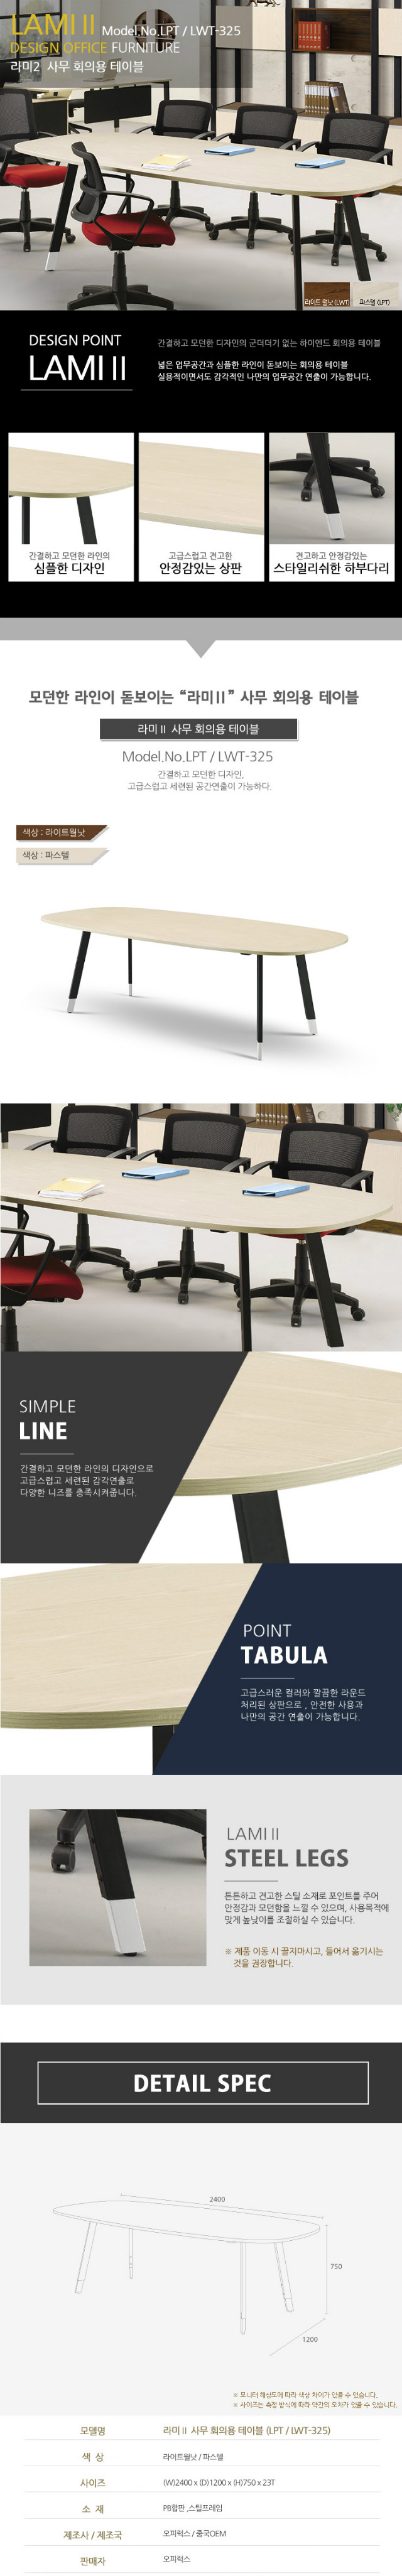 lamiⅡ_conference_table_lpt_lwt-325.jpg